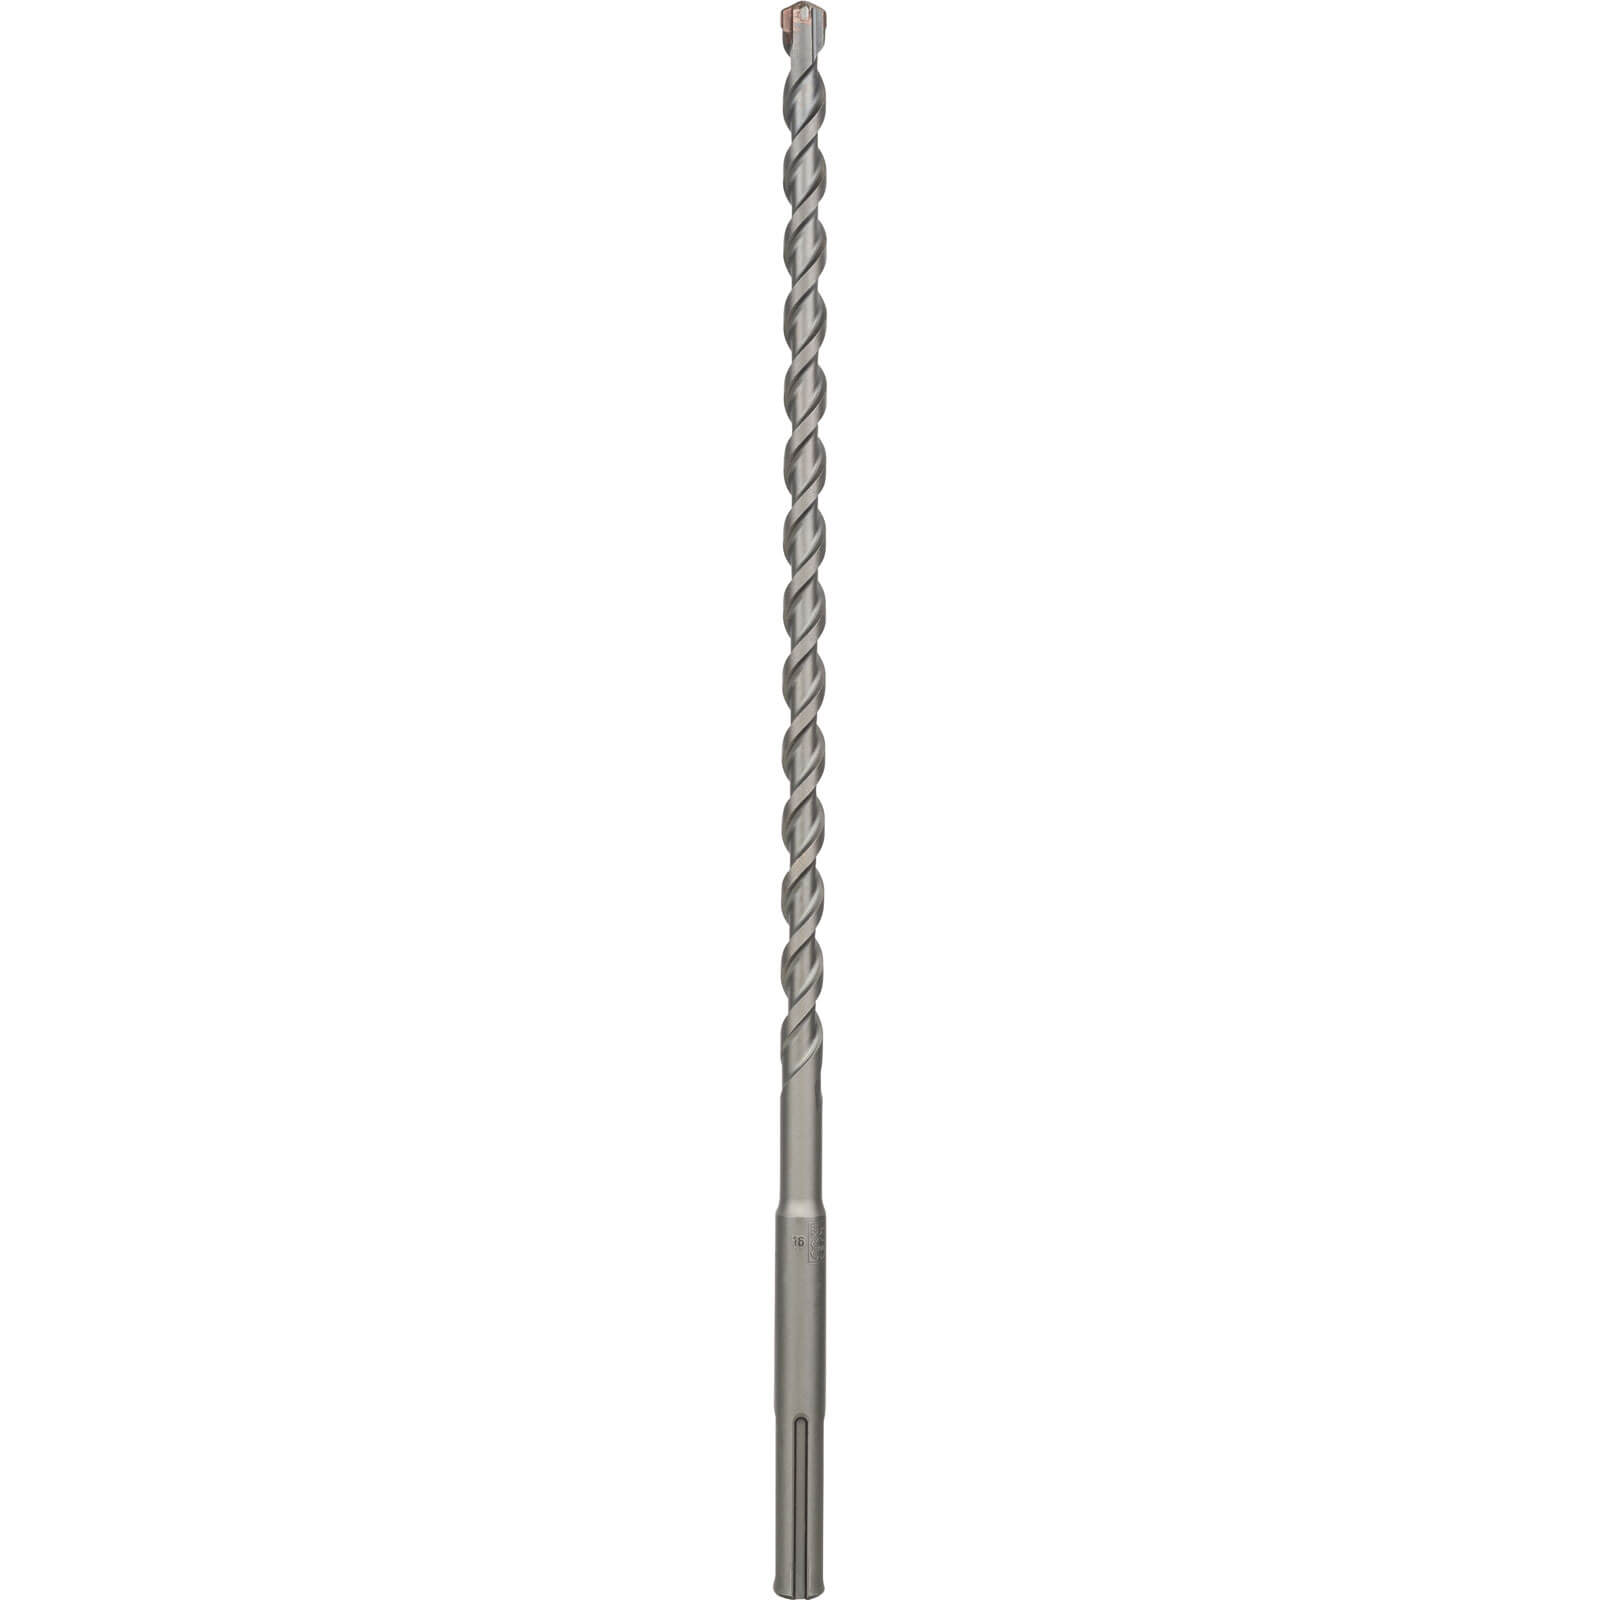 Image of Bosch M4 SDS Max Masonry Drill Bit 16mm 540mm Pack of 1